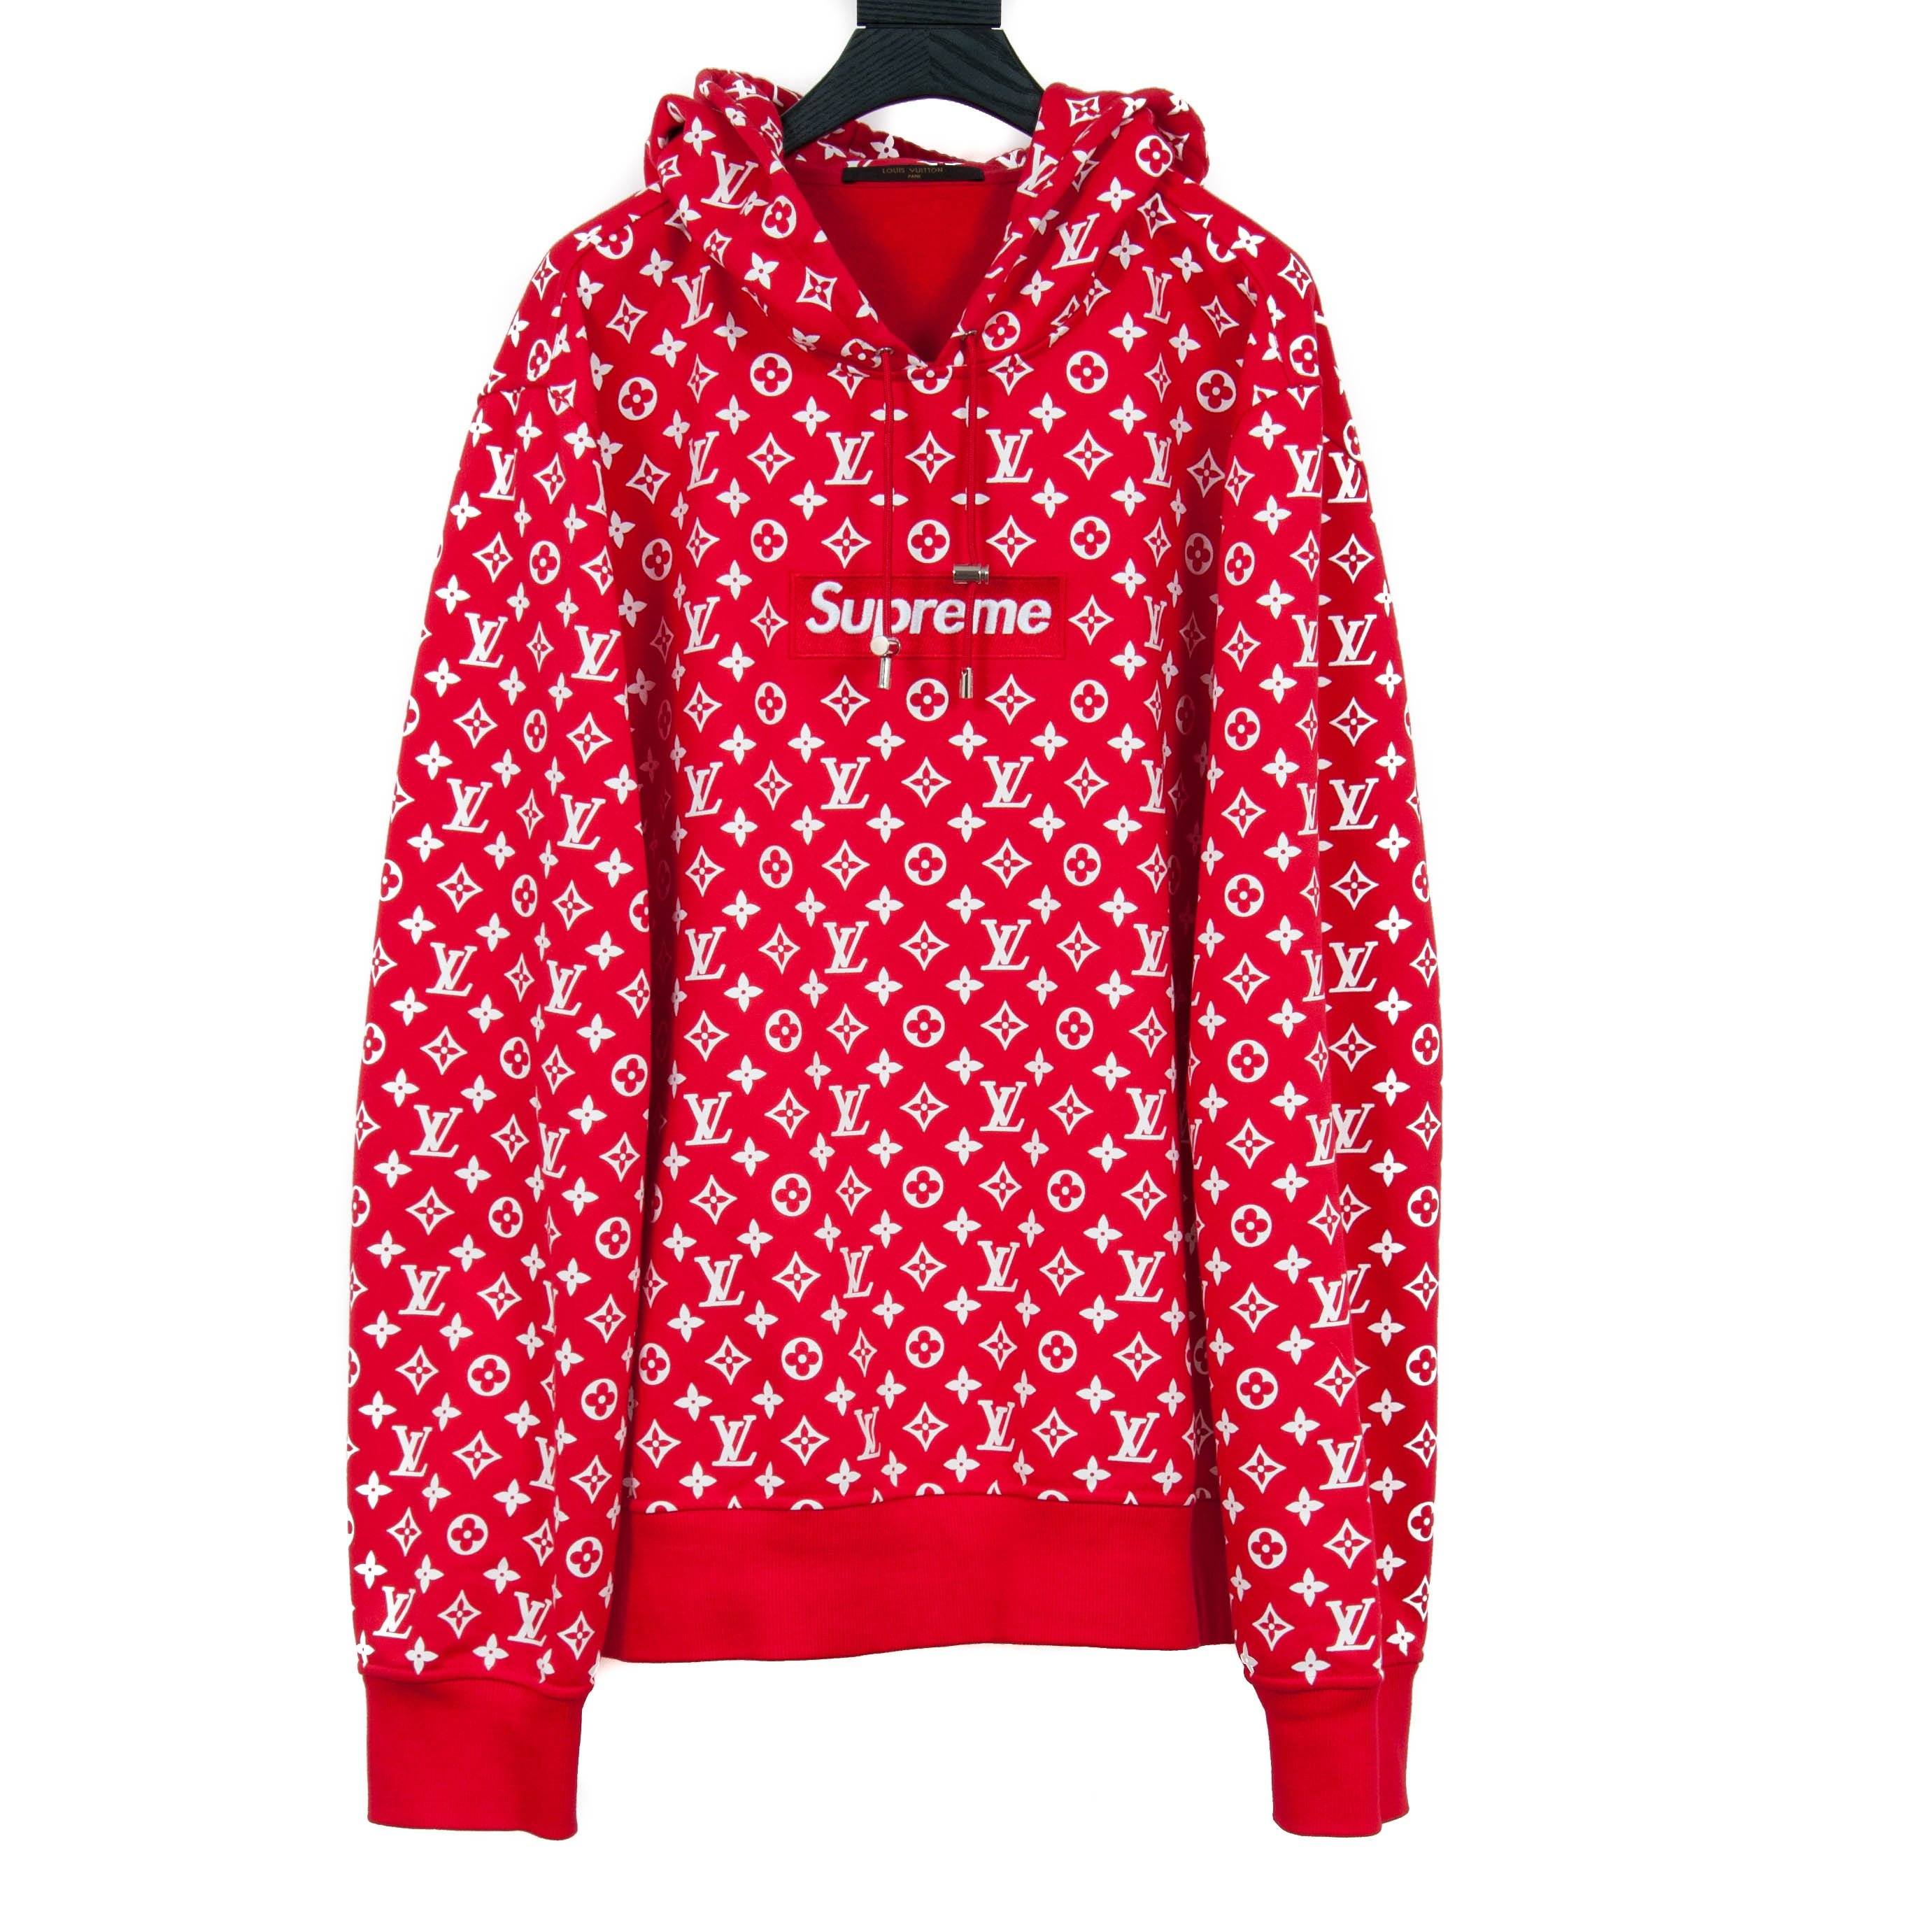 How Much Did The Supreme Lv Hoodie Retail For